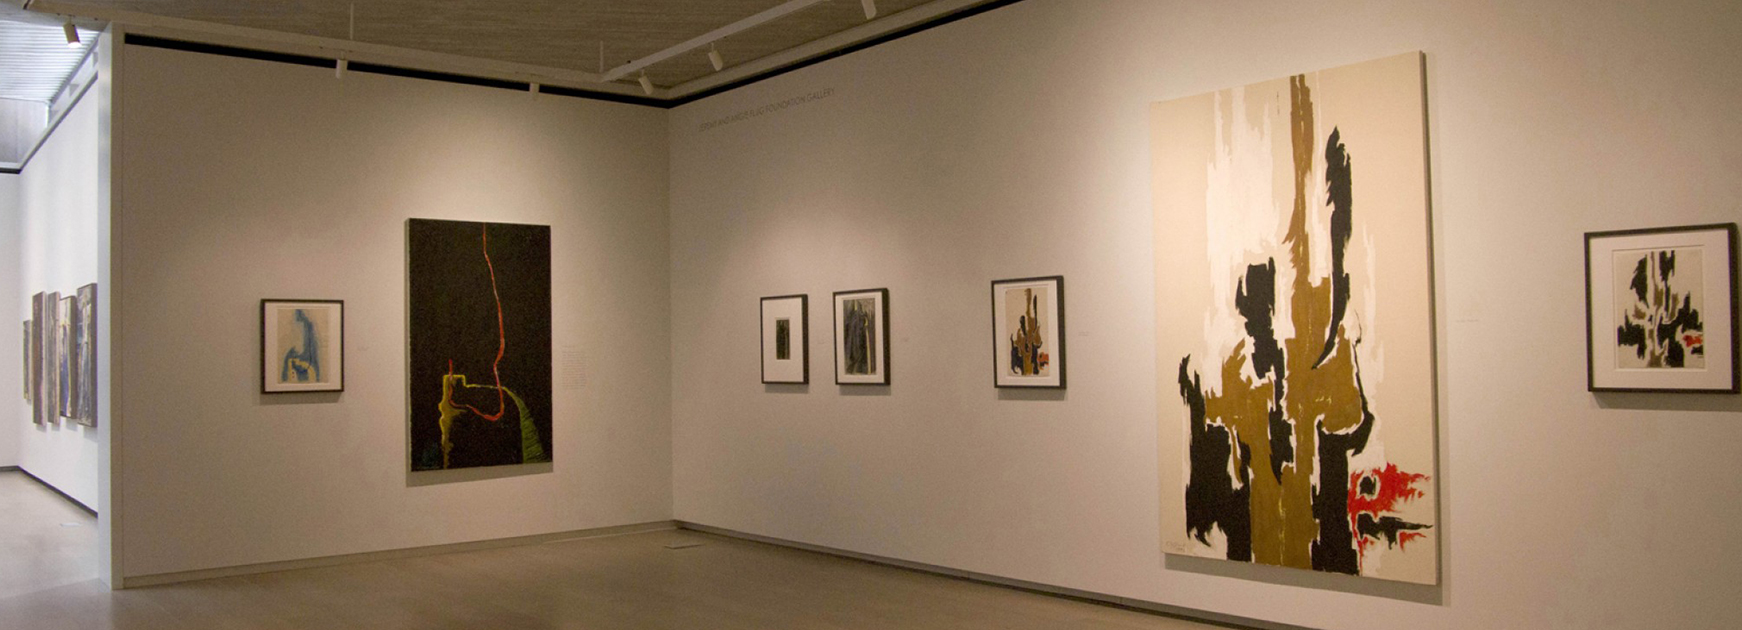 installation view of drawing painting process